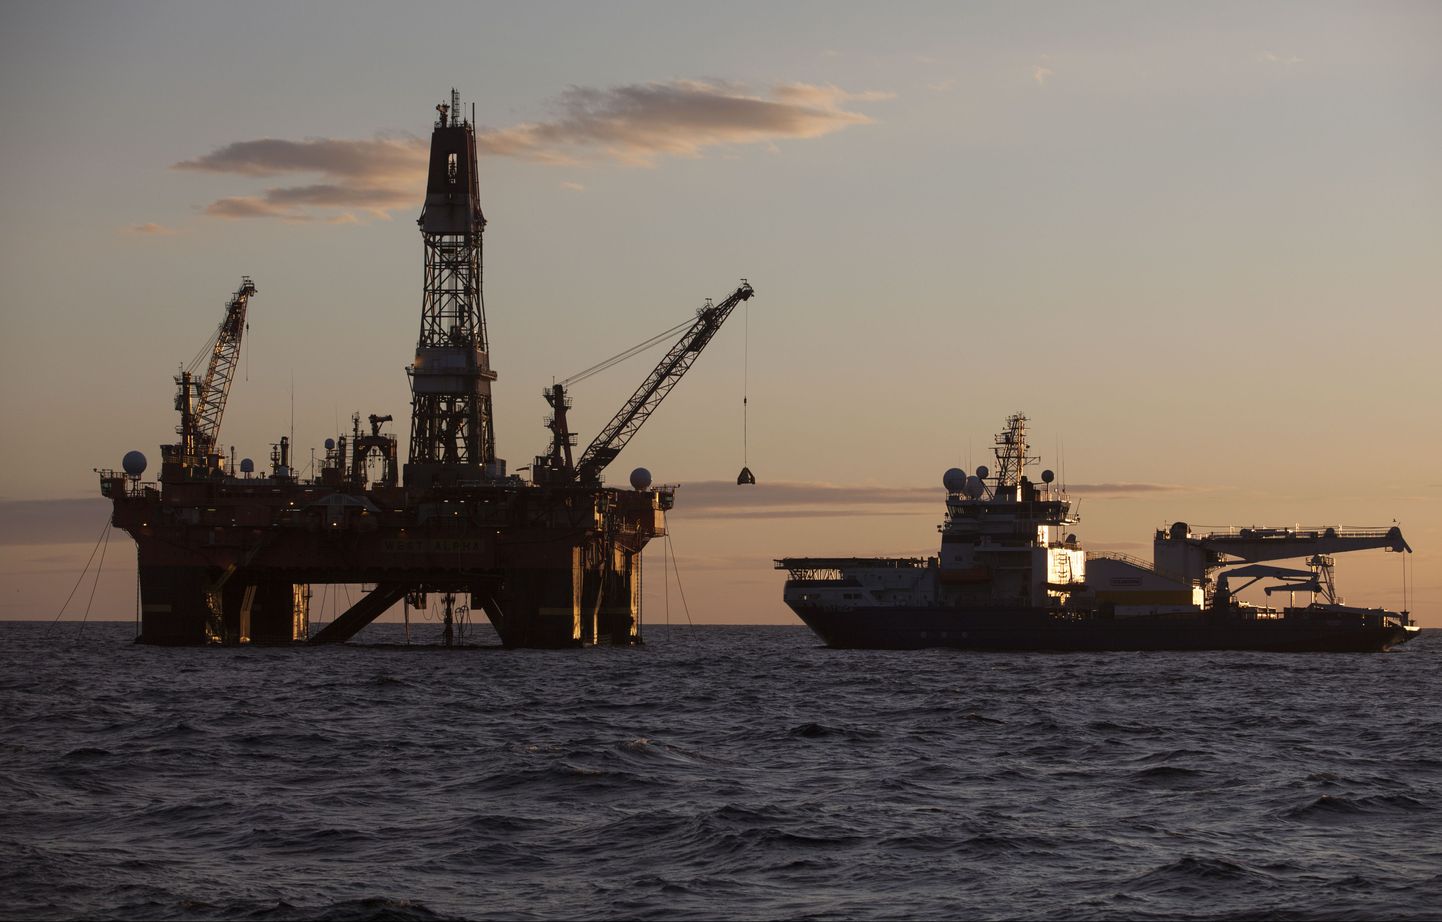 In this photo provided by the Rosneft company, West Alfa drilling platform is seen anchored at the Cara Sea some 250 km (156 miles) north off Russian shore, on Thursday, Sept. 18, 2014. Rosneft opened a new field of super-light oil in the Kara Sea, where the deposits reportedly exceed 100 million tonnes, company reported on Saturday, Sept. 27, 2014. (AP Photo/Rosneft press service) / TT / kod 436